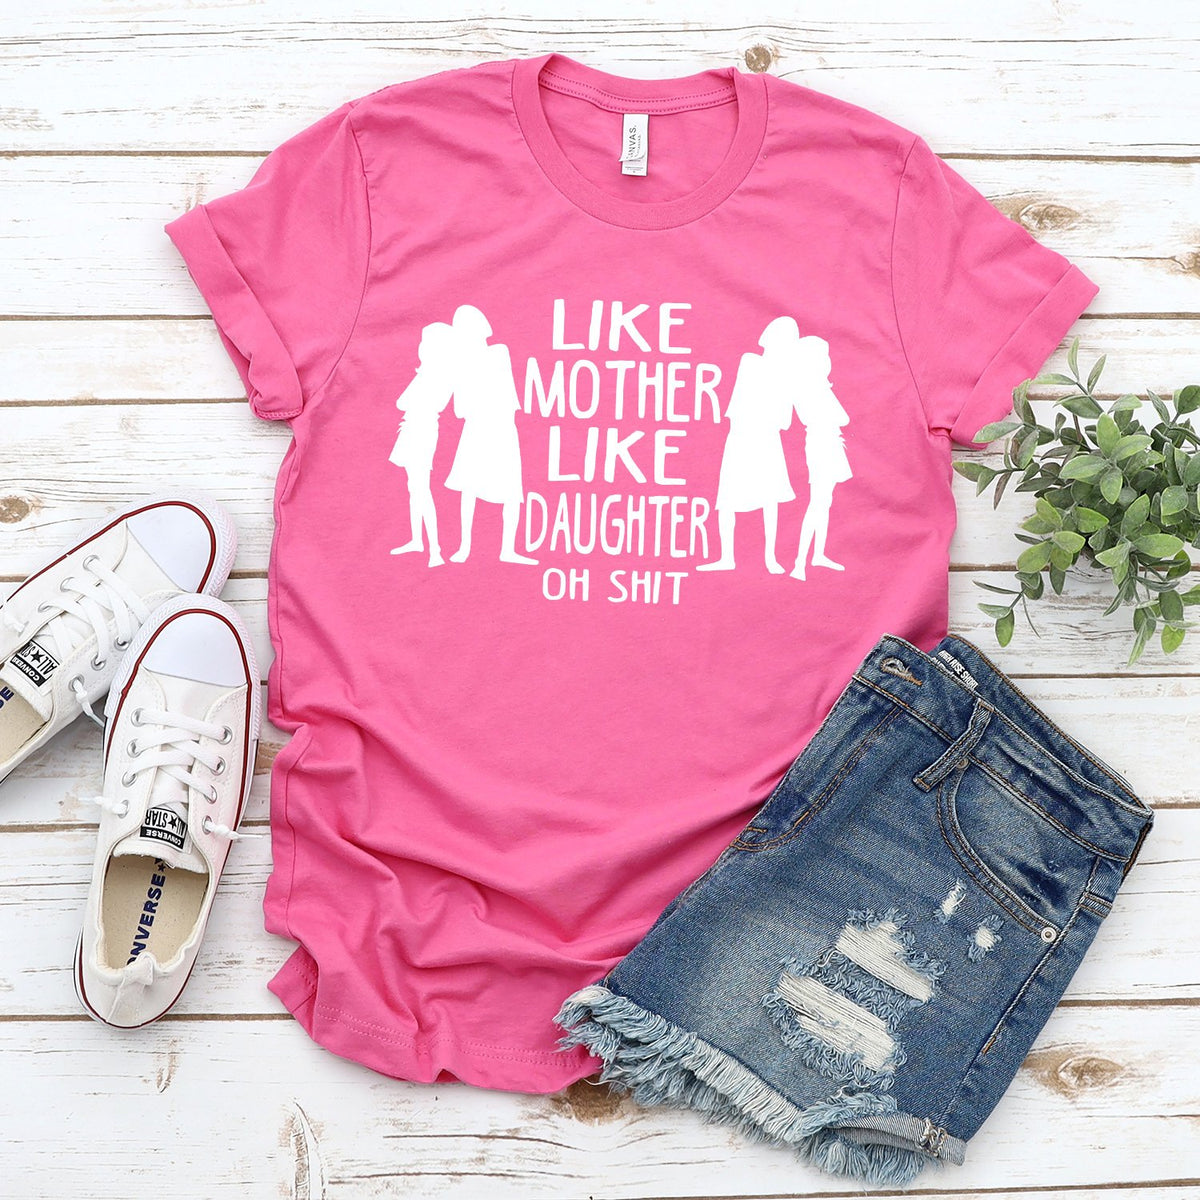 Like Mother Like Daughter Oh Shit - Short Sleeve Tee Shirt